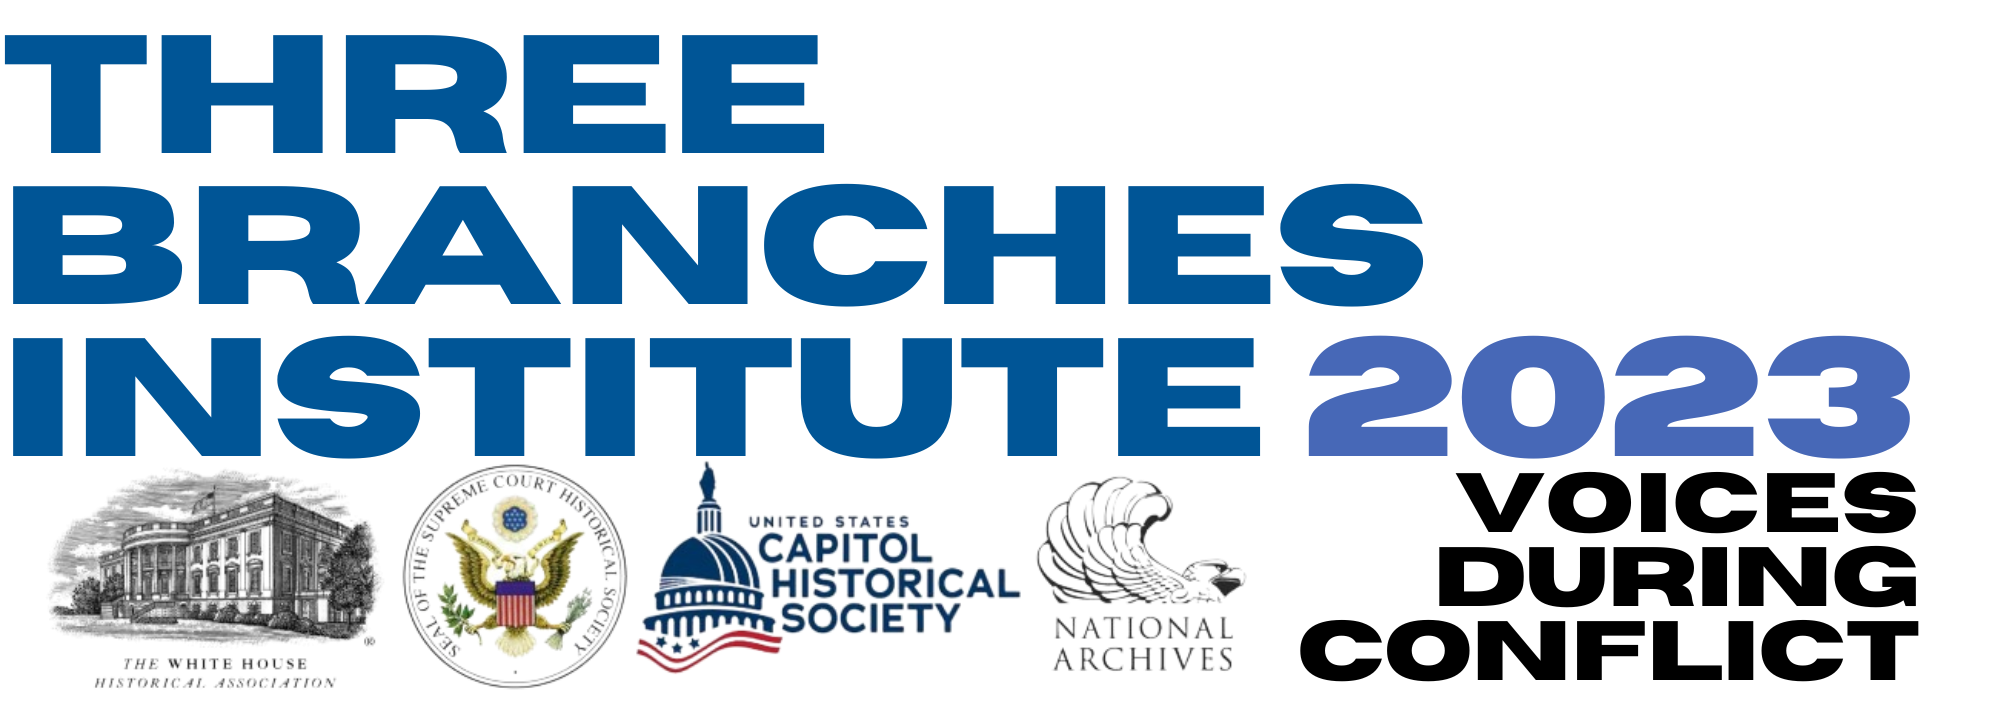 Three Branches Institute 2023: Voices During Conflict and the Logos of the White House Historical Association, the Supreme Court Society, the U.S. Capitol Historical Society, and the National Archives.